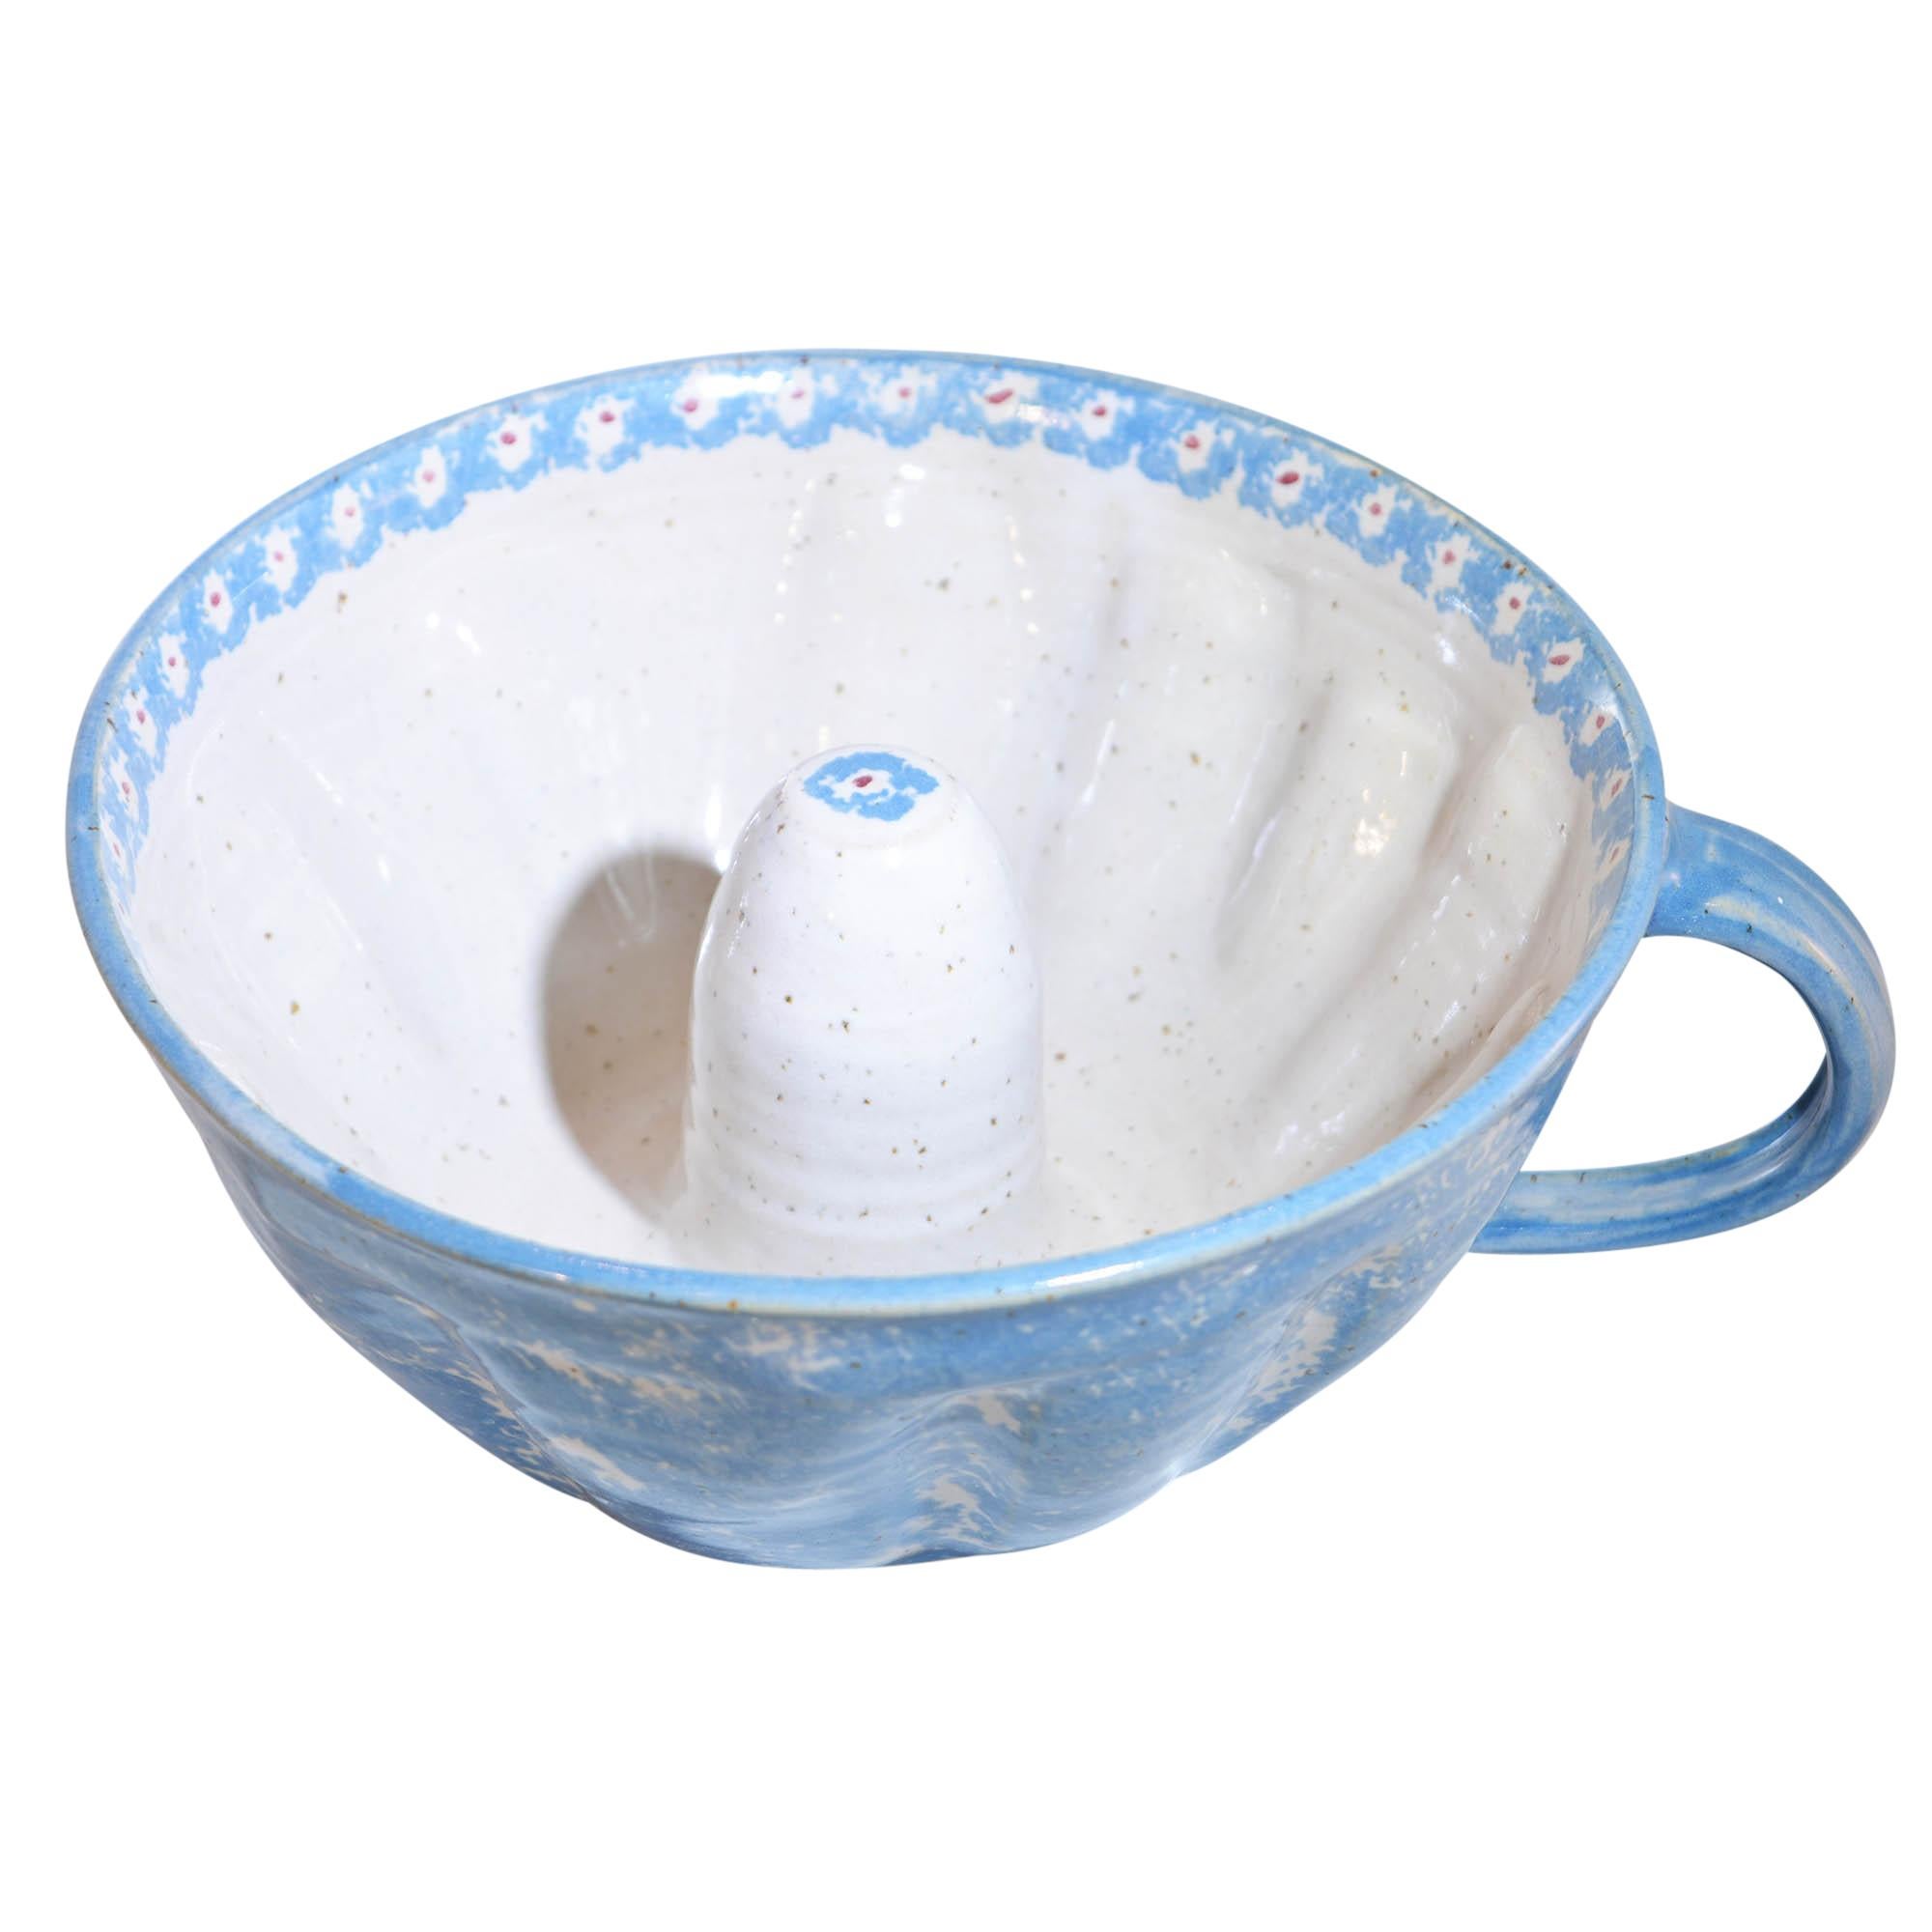 Handcrafted cake plate and bundt cake form are works of AnnA Maria Preuss. The 12.5” cake plate is hand decorated with a floral design and has AnnA’s mark on the bottom. The coordinating bundt form is hand painted blue on the outside and features